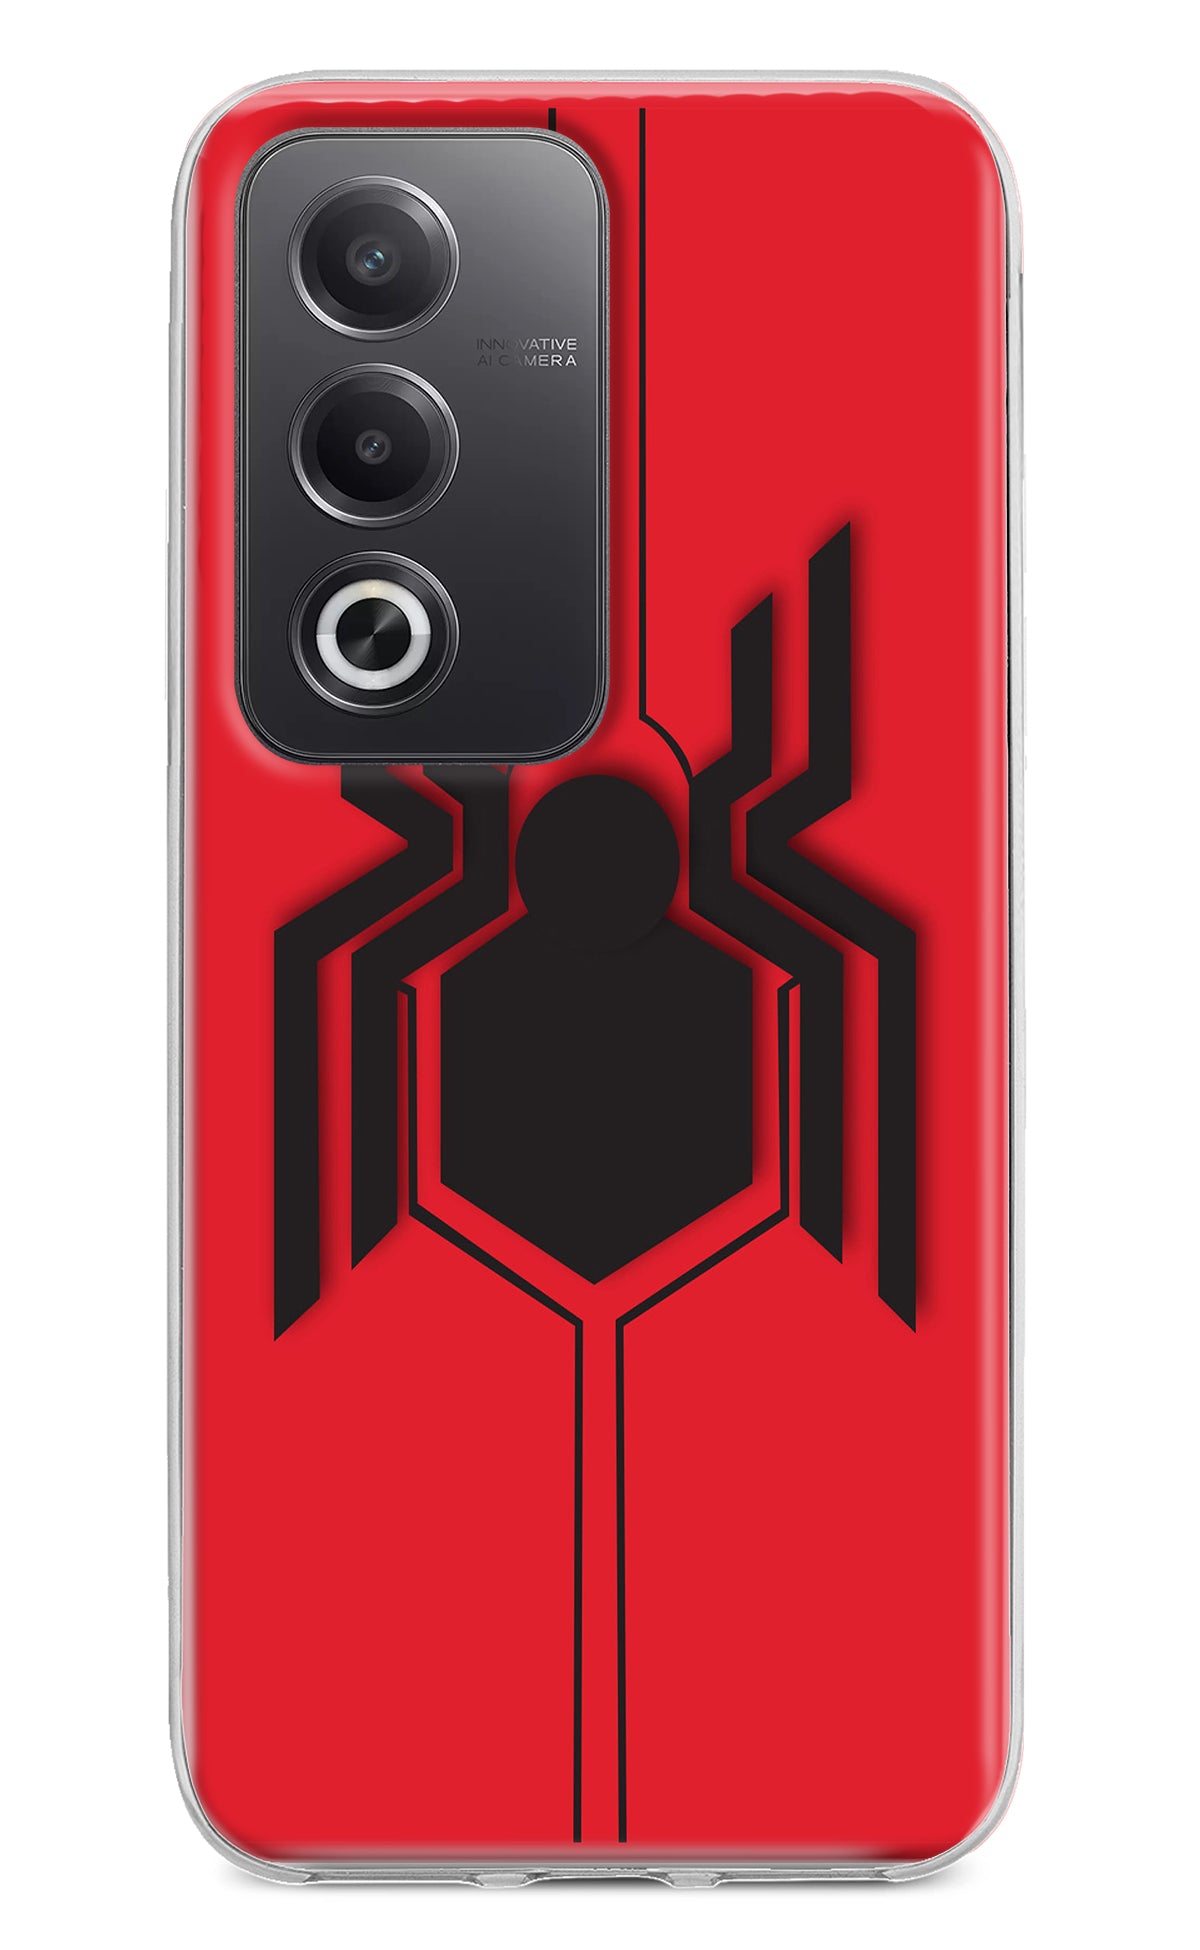 Spider Oppo A3 Pro 5G Back Cover